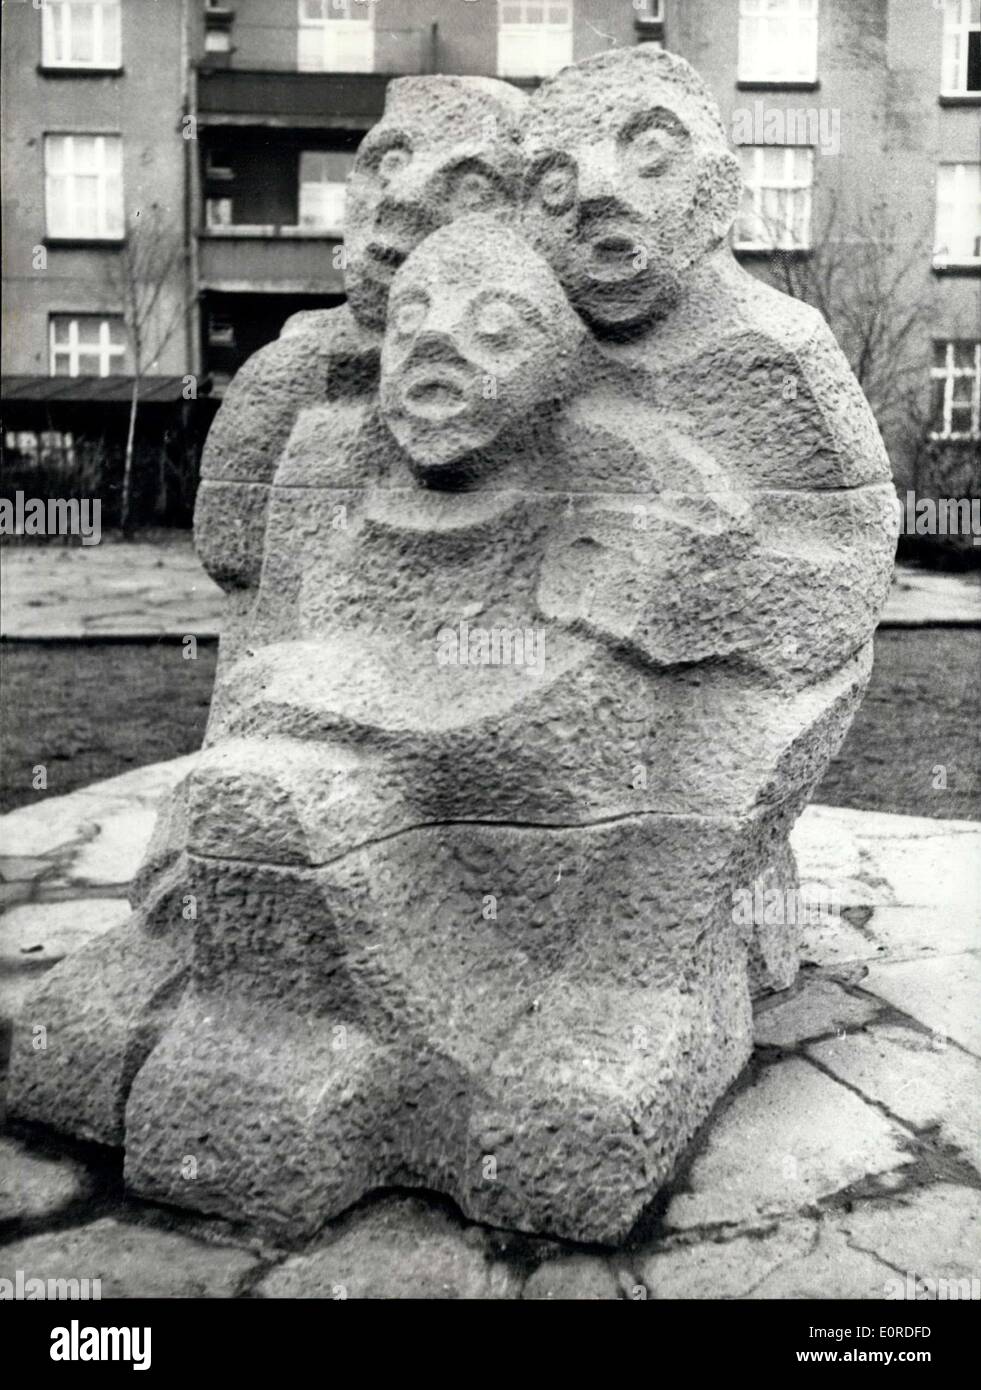 Mar. 17, 1959 - The ''unknown spectator of football-games'' : had been set a monument at Herne/Germany (Herne). The town Herne in the Ruhr-district is said to be one of the most important towns for football, so the city-fathers asked sculptor Elisabeth Hoffmann (ELisabeth Hoffmann) to make a stone plastic, 2 metres high, which is generally said to be the ''monument of the unknown spectator of football - games' Stock Photo